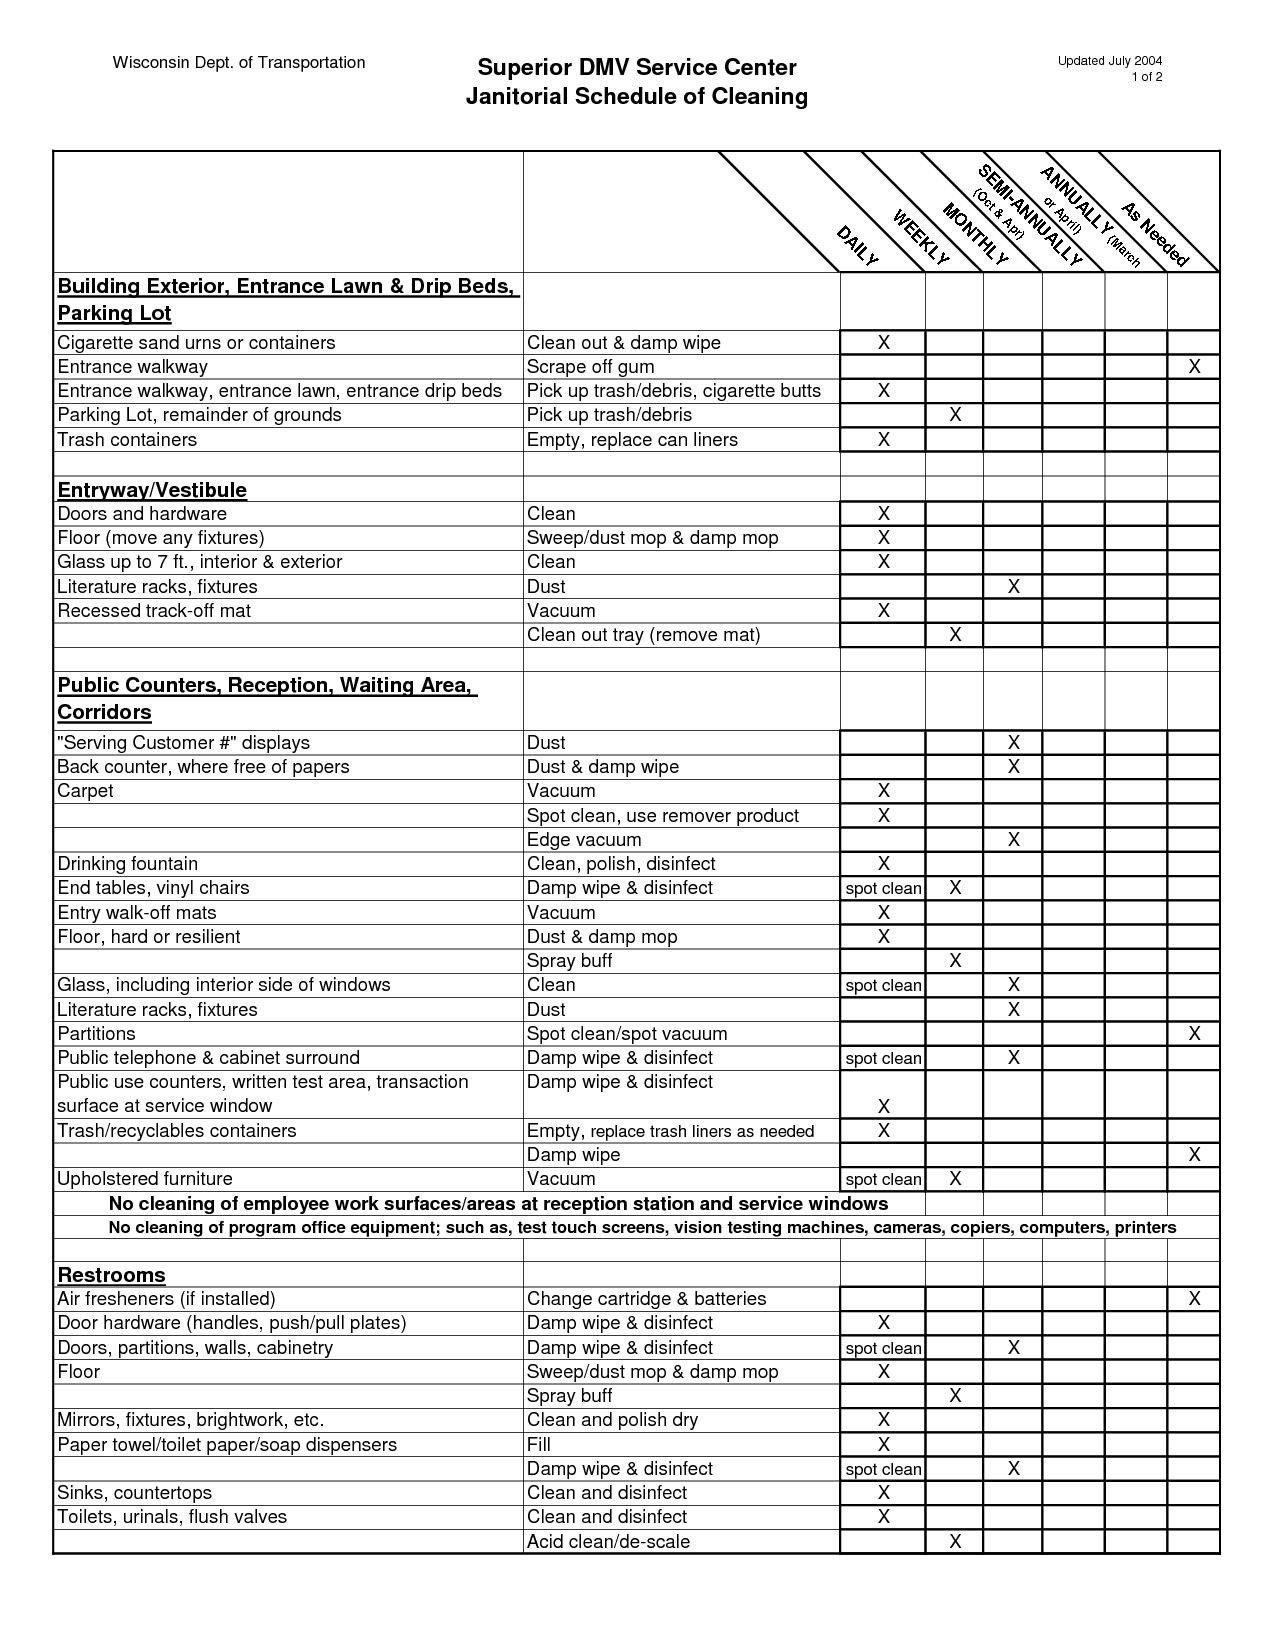 Janitorial Checklist Template charlotte clergy coalition